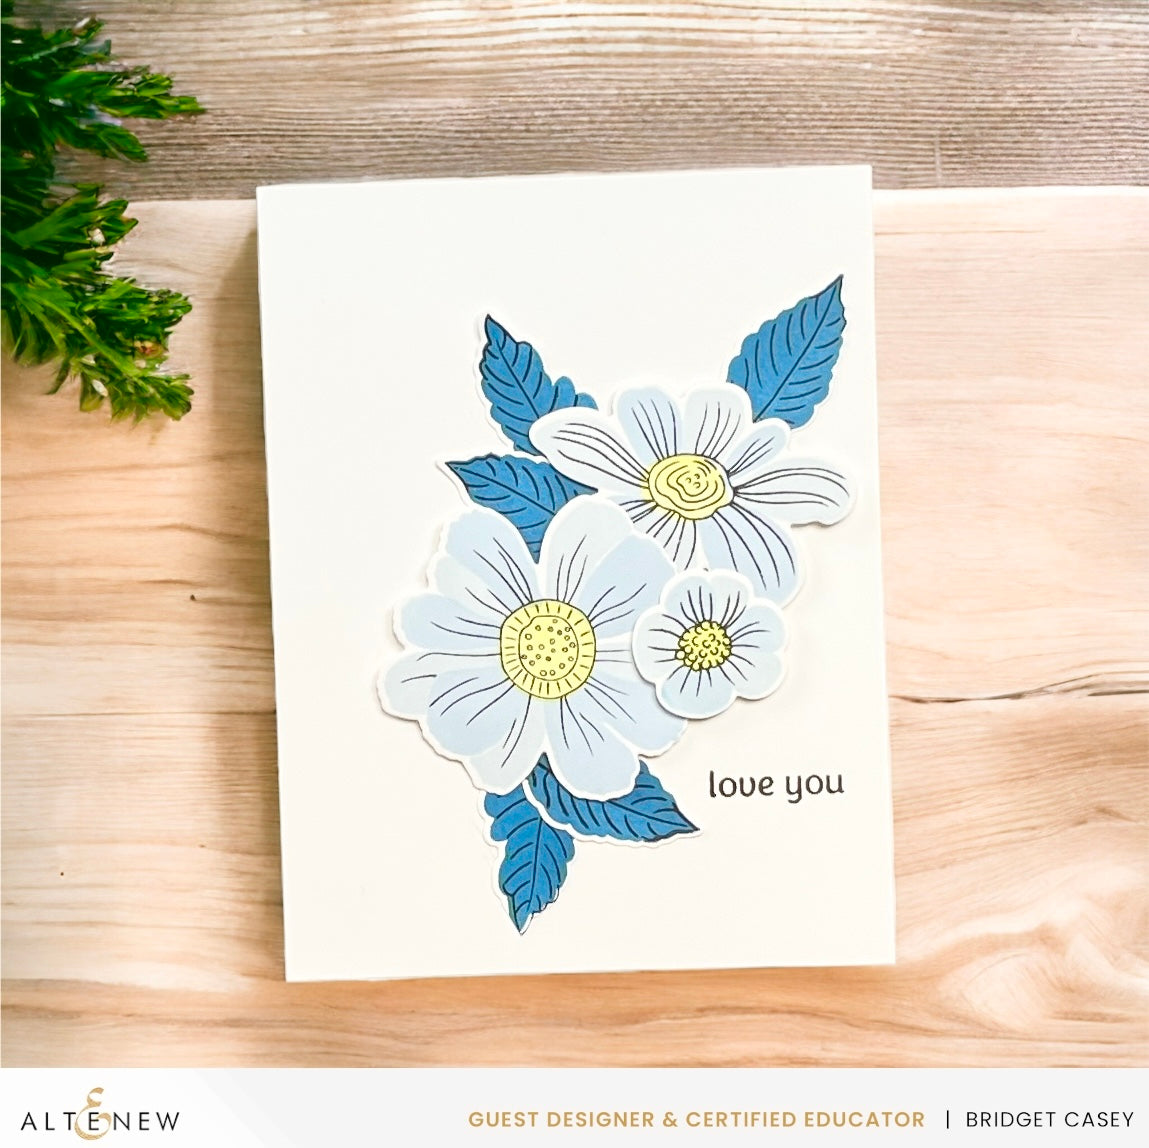 Altenew - Dynamic Duo: Floral Whimsy & Add-on Die Bundle